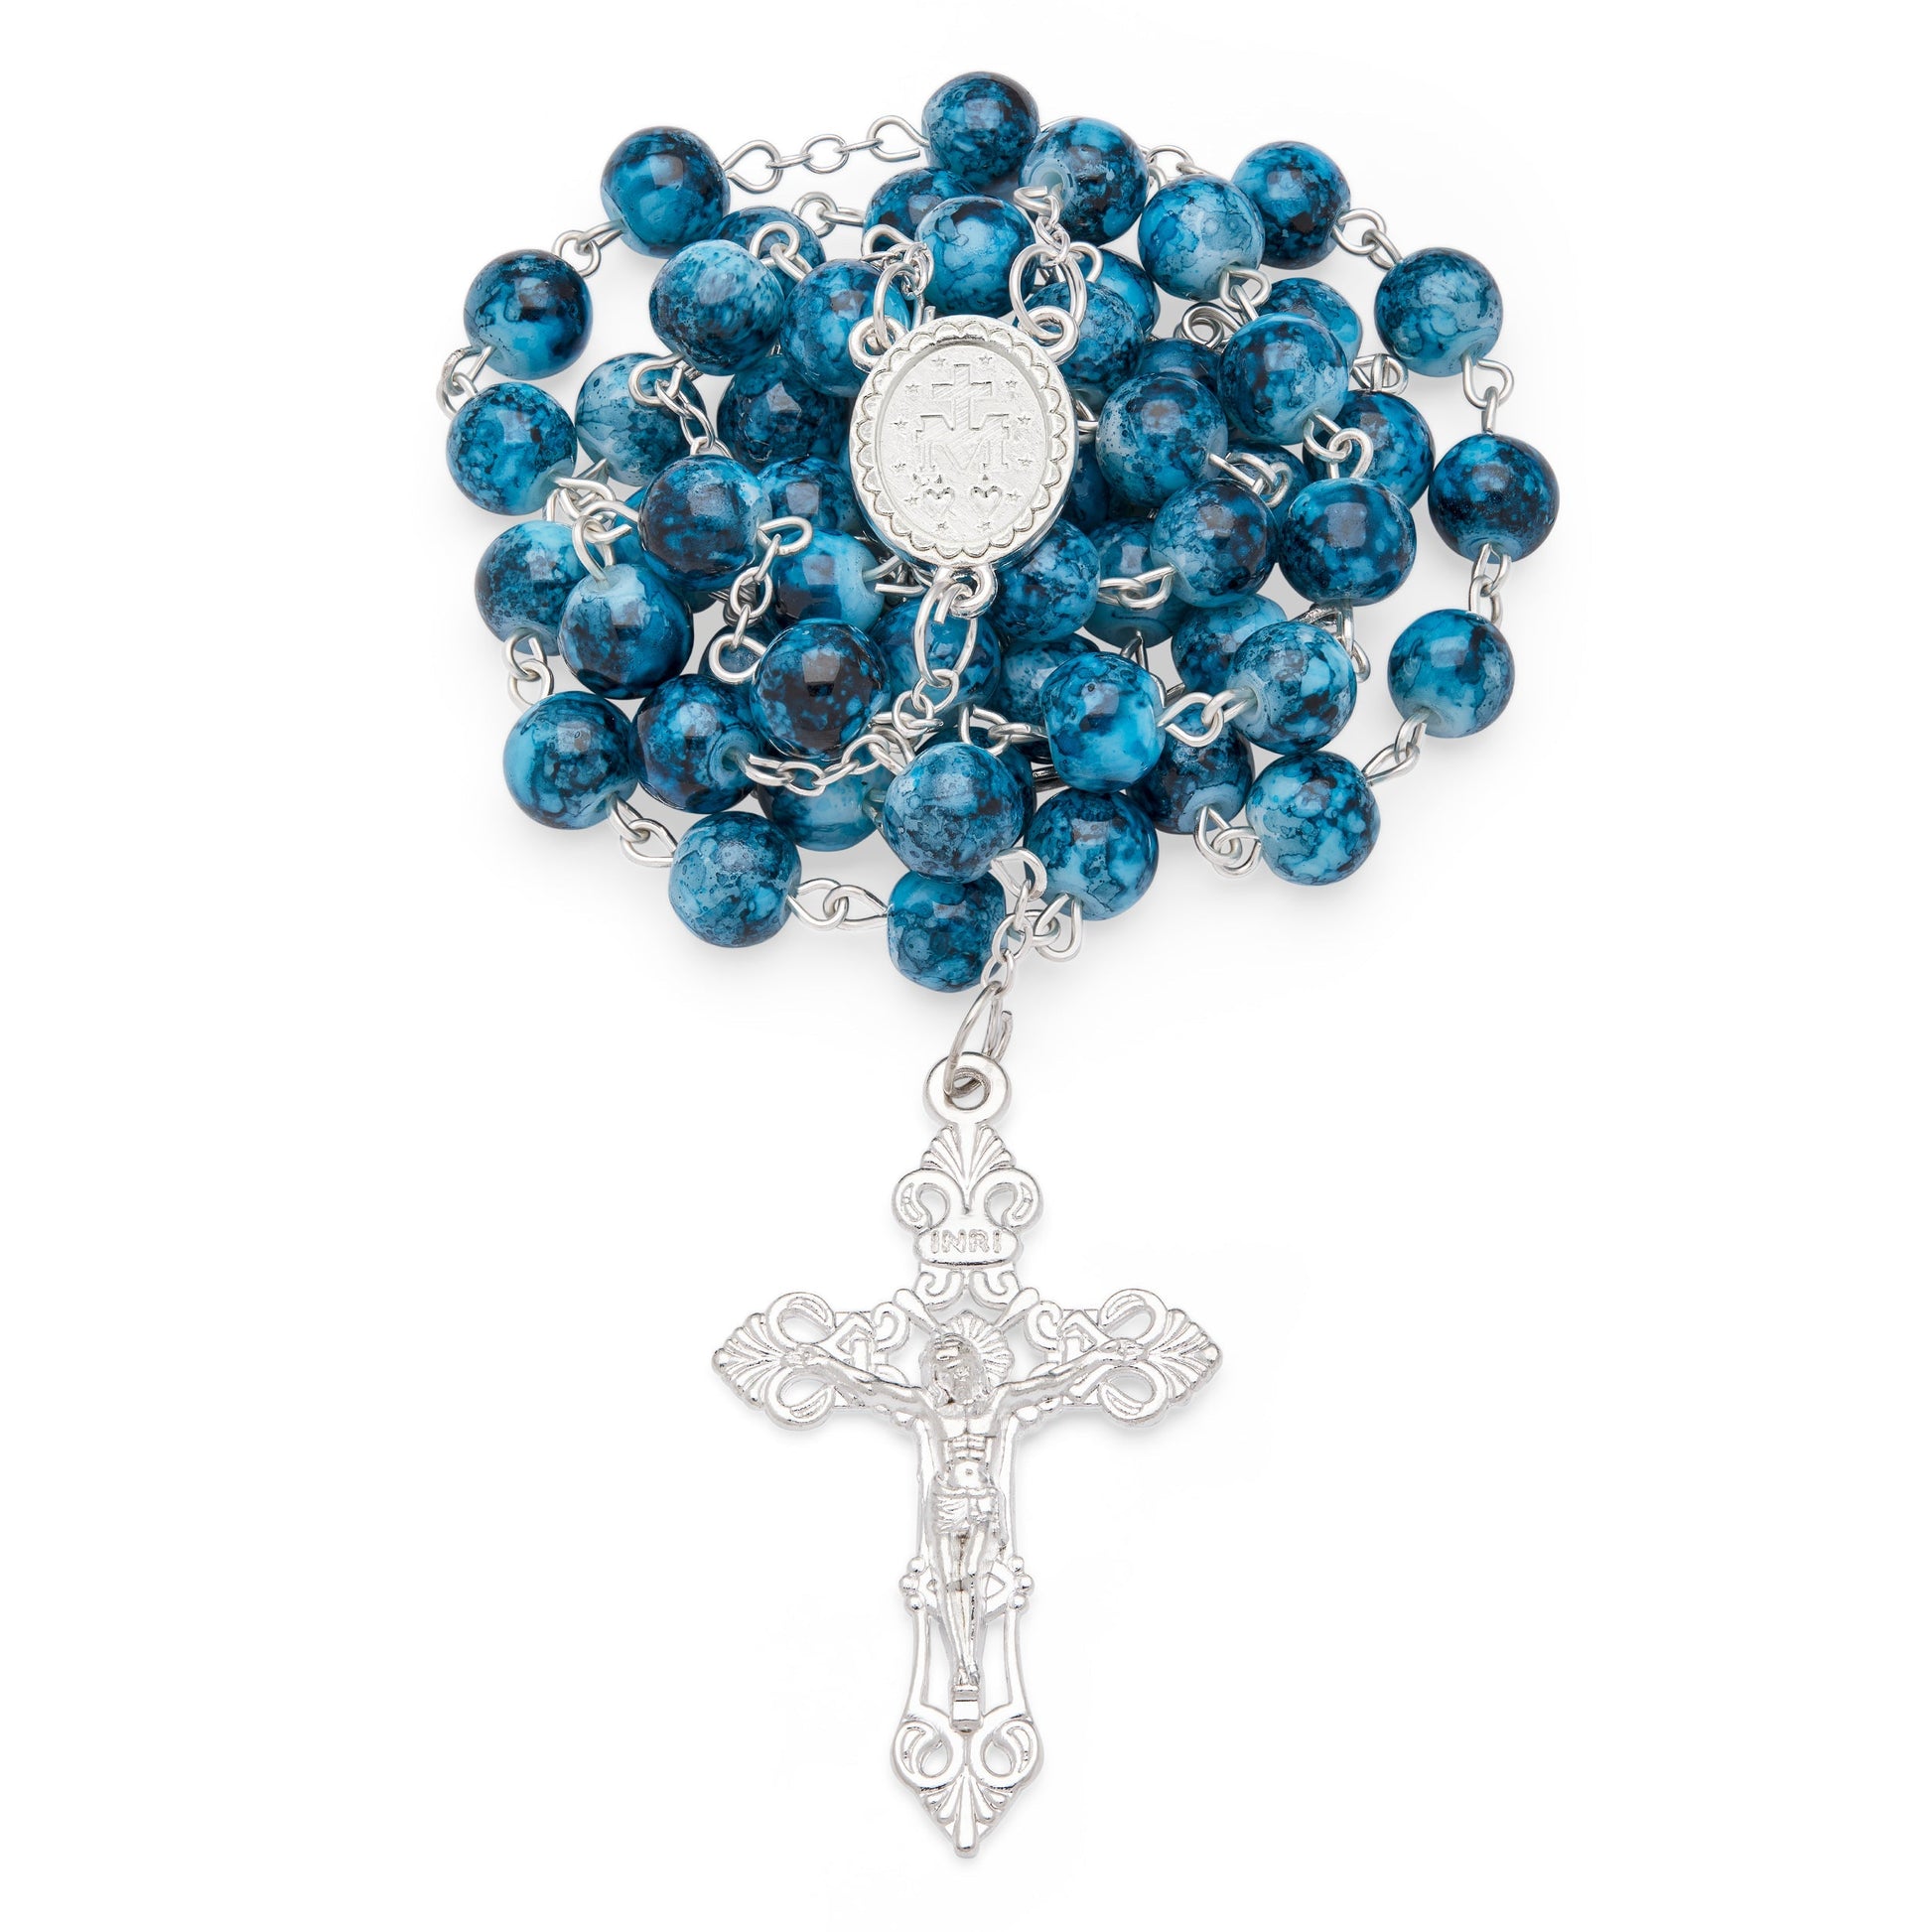 MONDO CATTOLICO Prayer Beads 55 cm (21.65 in) / 8 mm (0.3 in) Blue Marble Effect Rosary